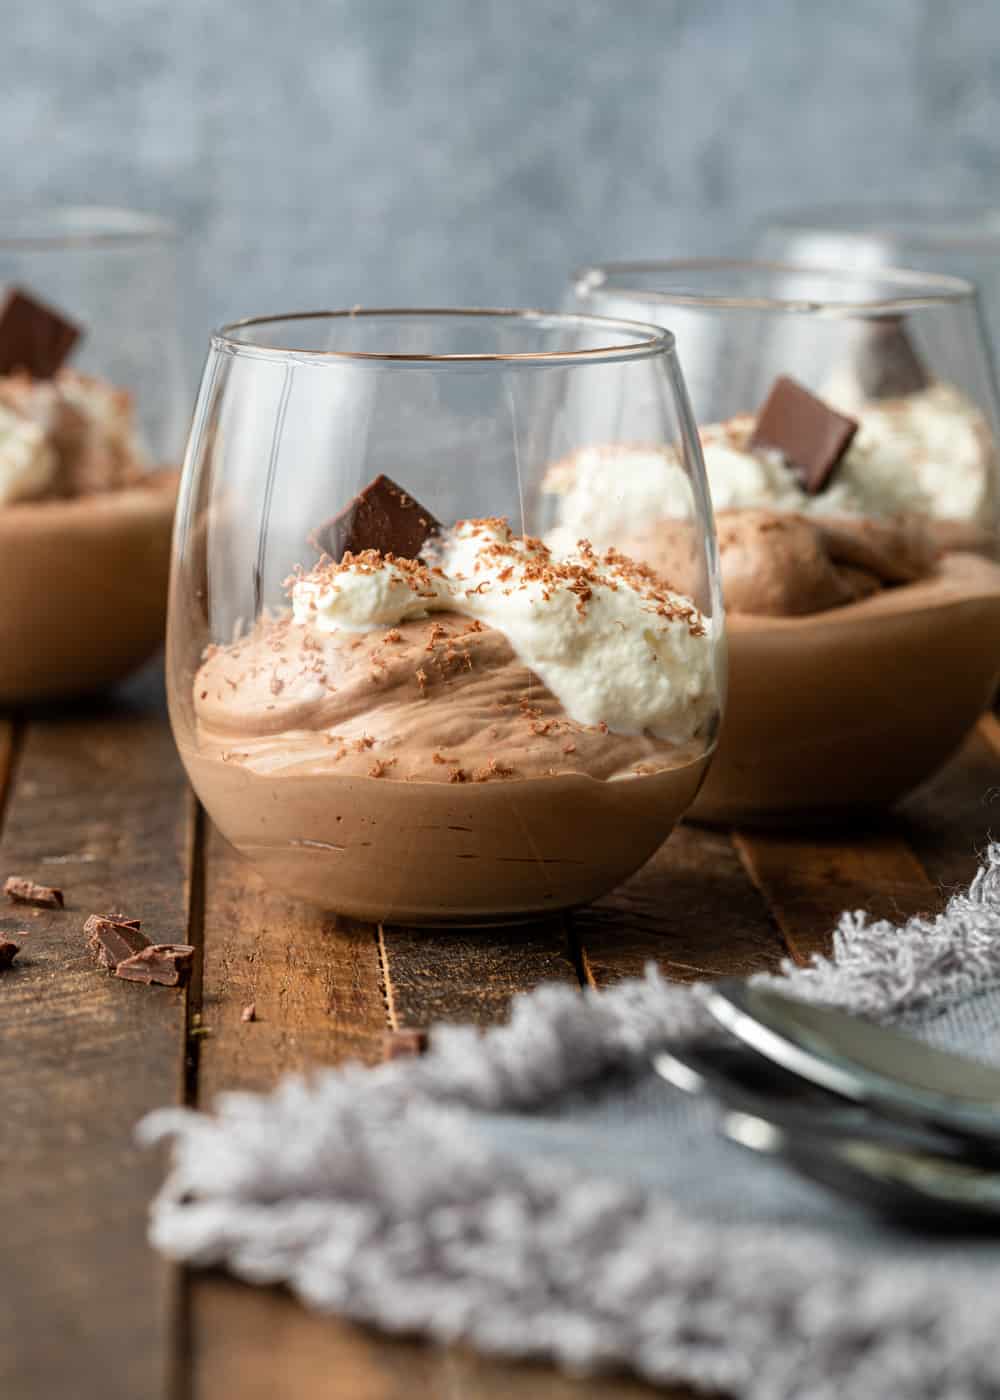 A glass bowl on a table, with Chocolate and Mousse